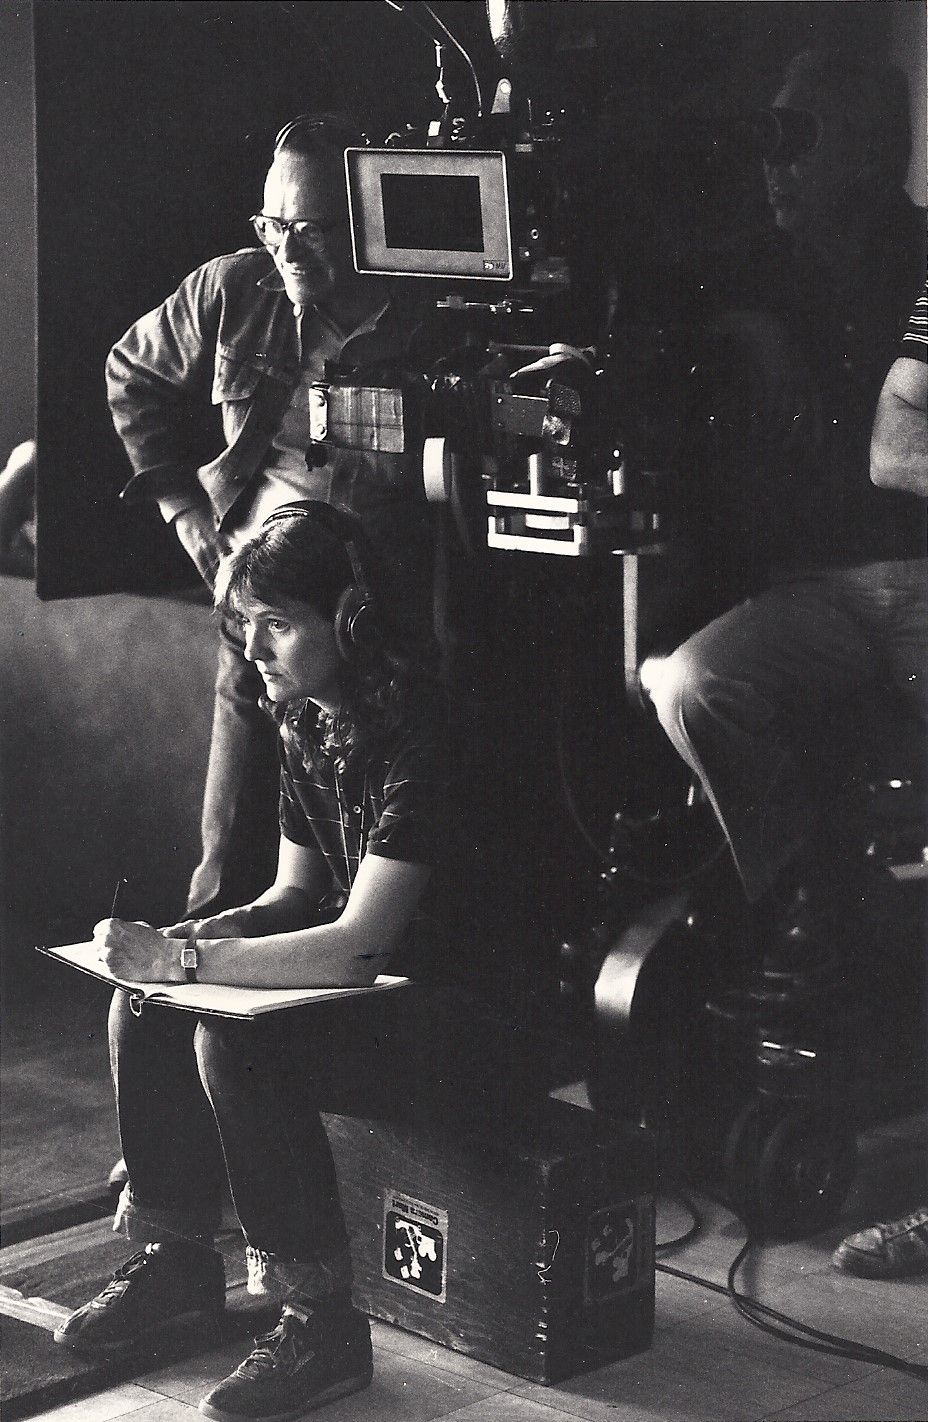 Sidney Lumet and Martha Pinson on the set of ‘Power,’ 1985. Photo Credit: Kerry Hayes